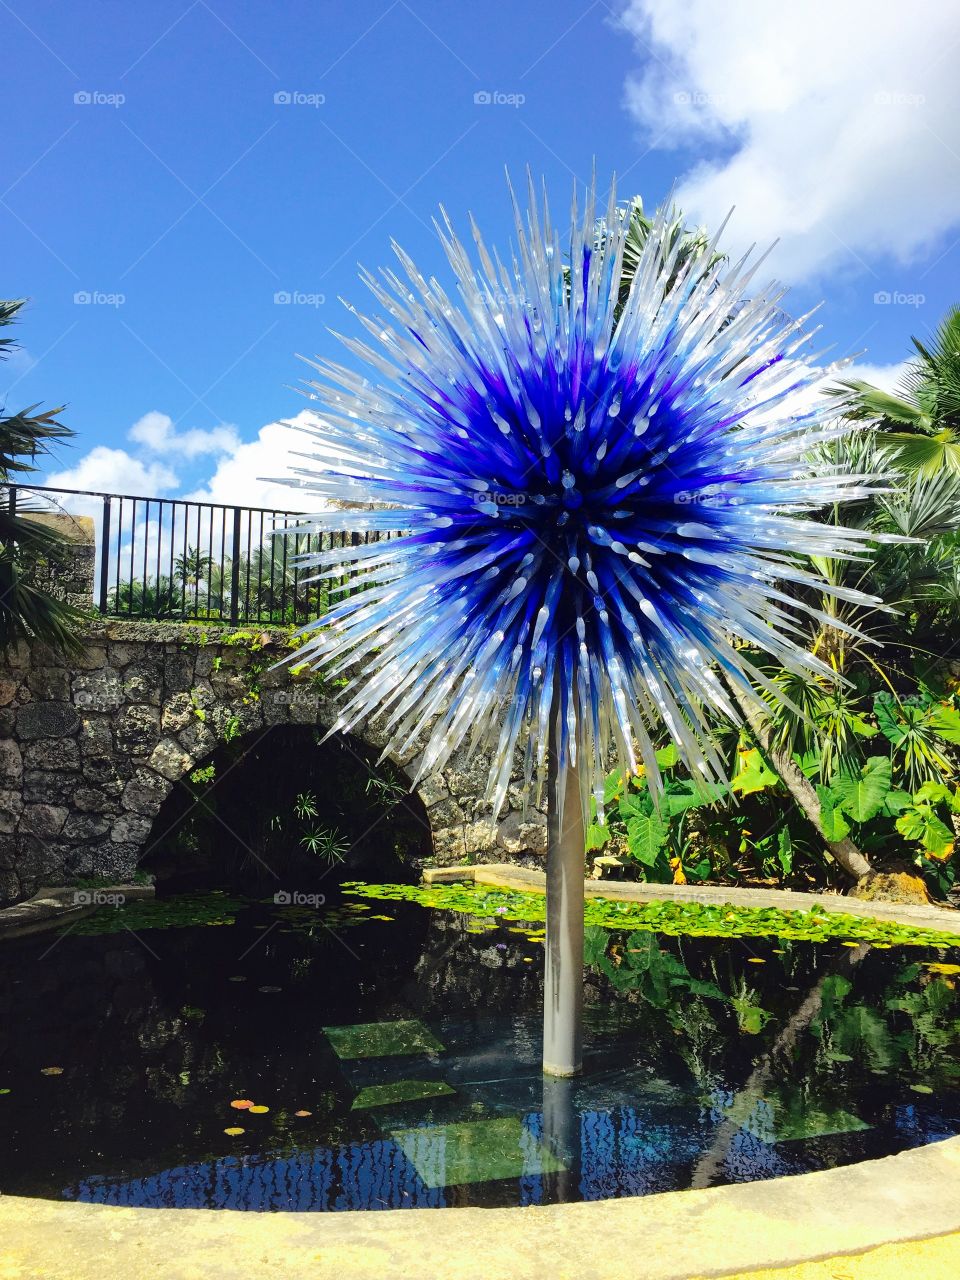 Spikes of glass. Glass blown art at tropical park miami